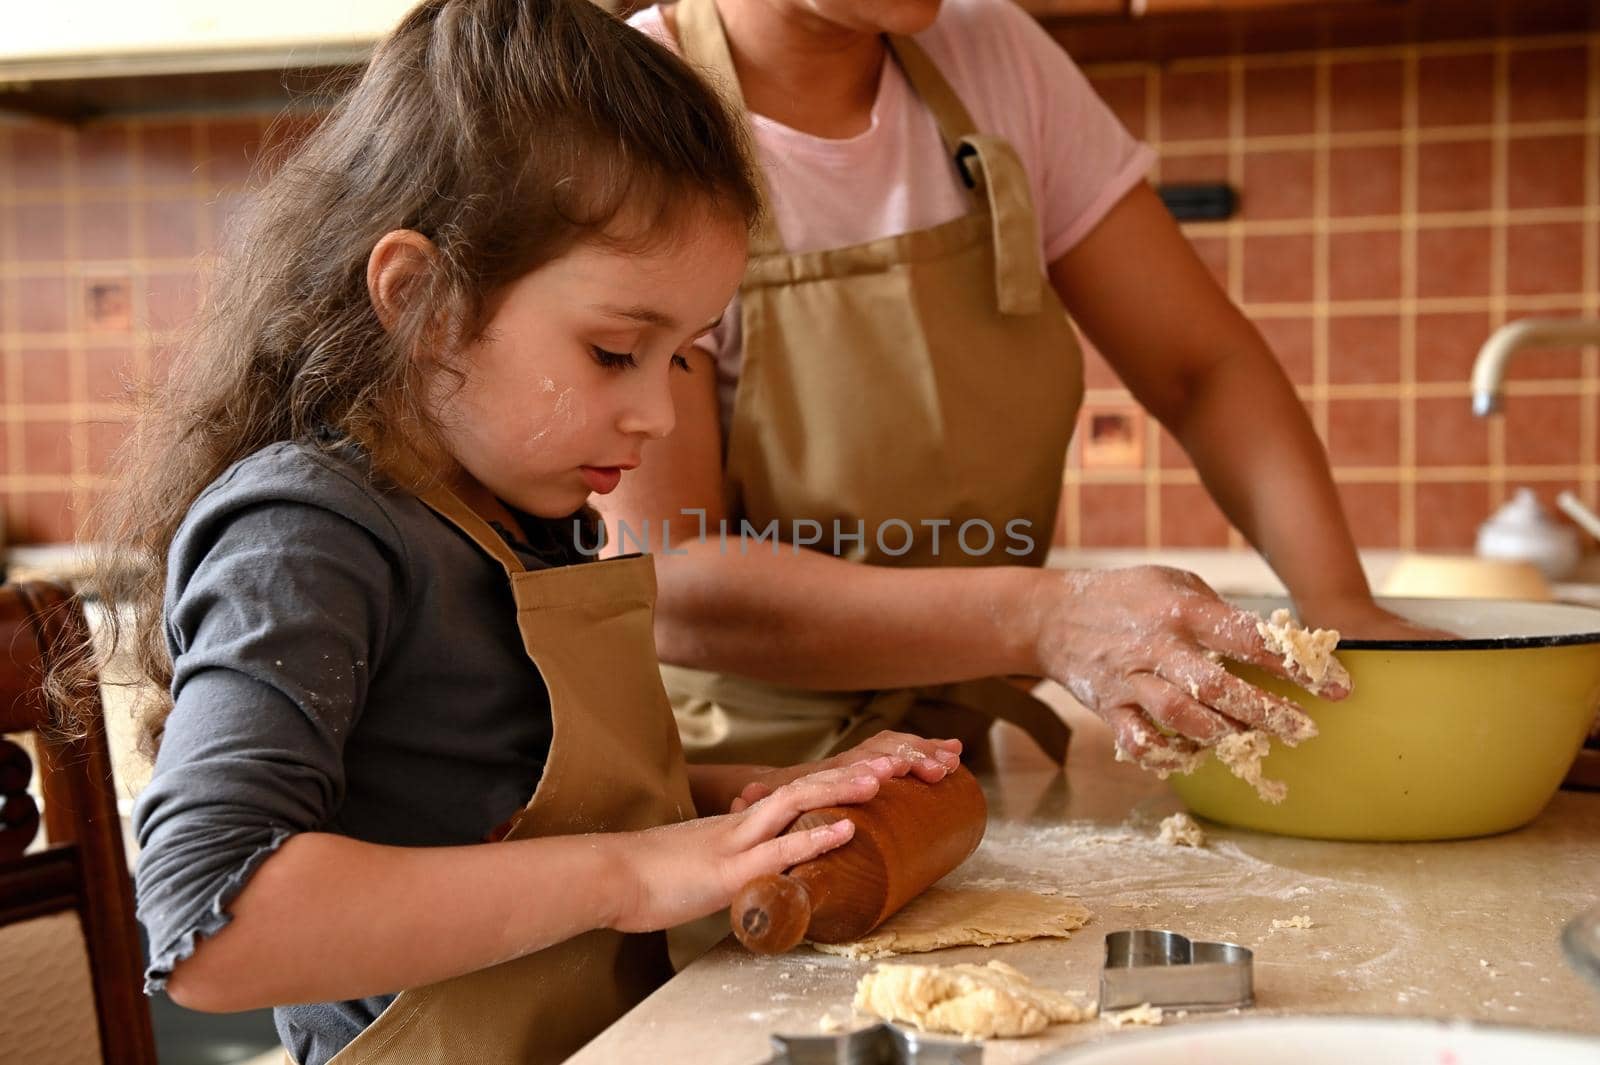 Side portrait of beautiful little girl, wearing a beige chef's apron, kneading and rolling dough with a wooden rolling pin. Cutting molds and fresh ingredients on a kitchen countertop. Baking concept